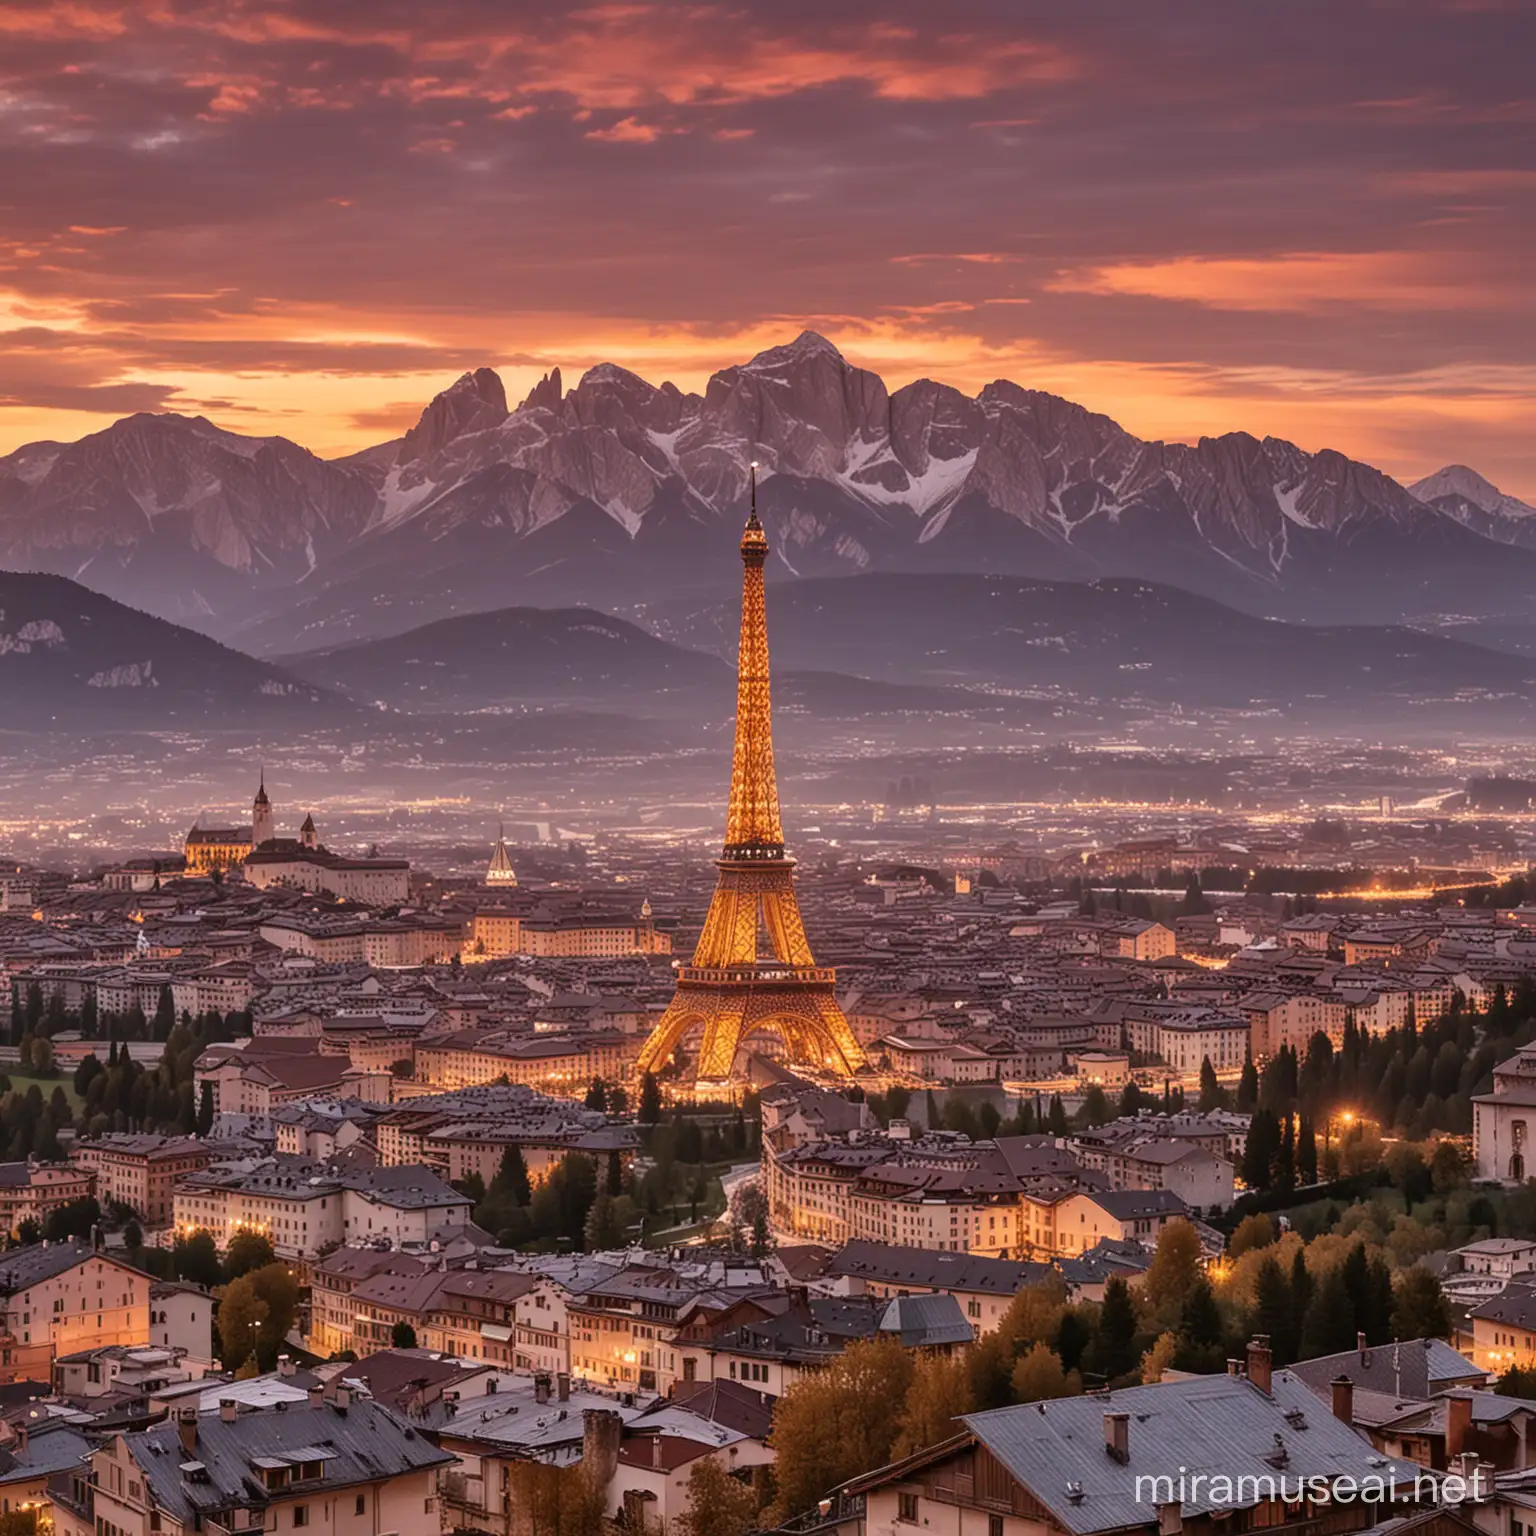 Spectacular Sunset over Dolomites with Iconic Eiffel Tower Silhouette